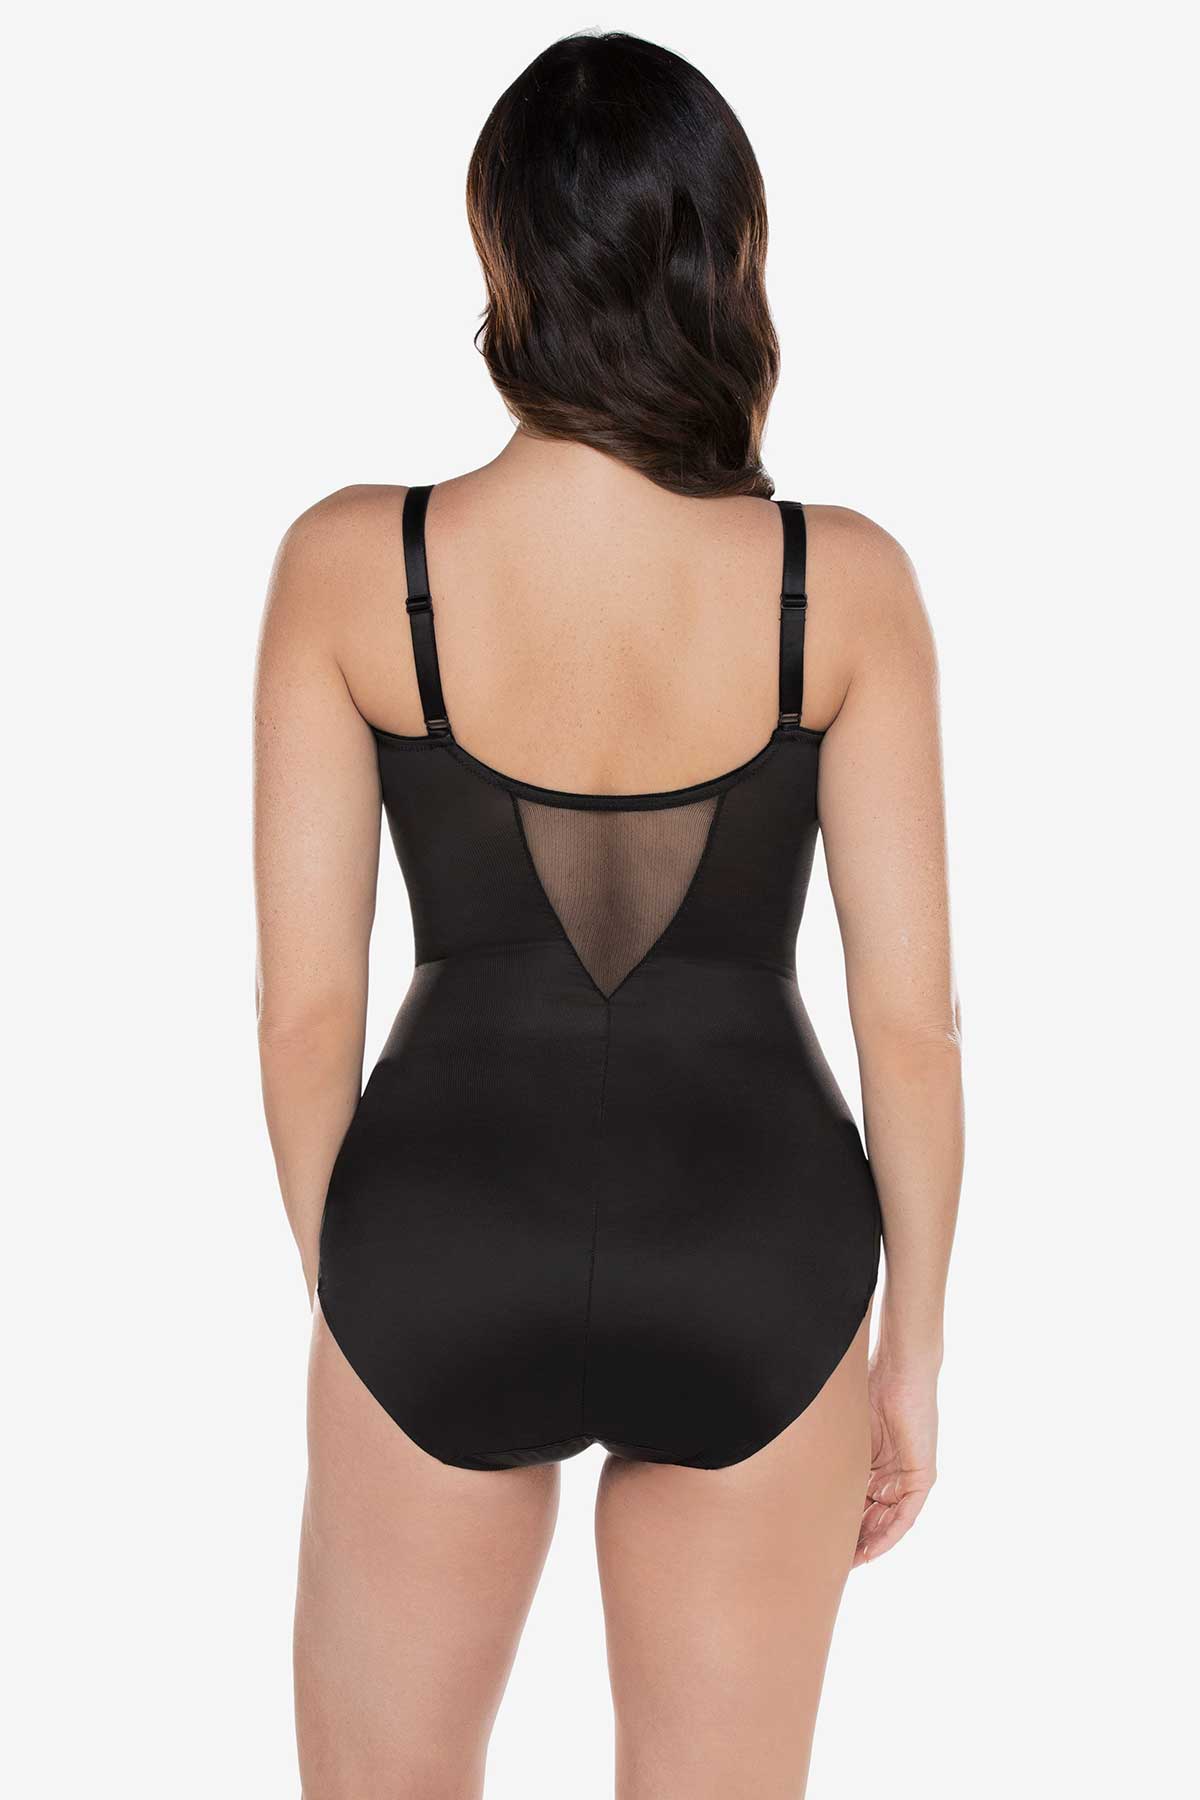 Sexy Sheer Shaping Bodybriefer - Black